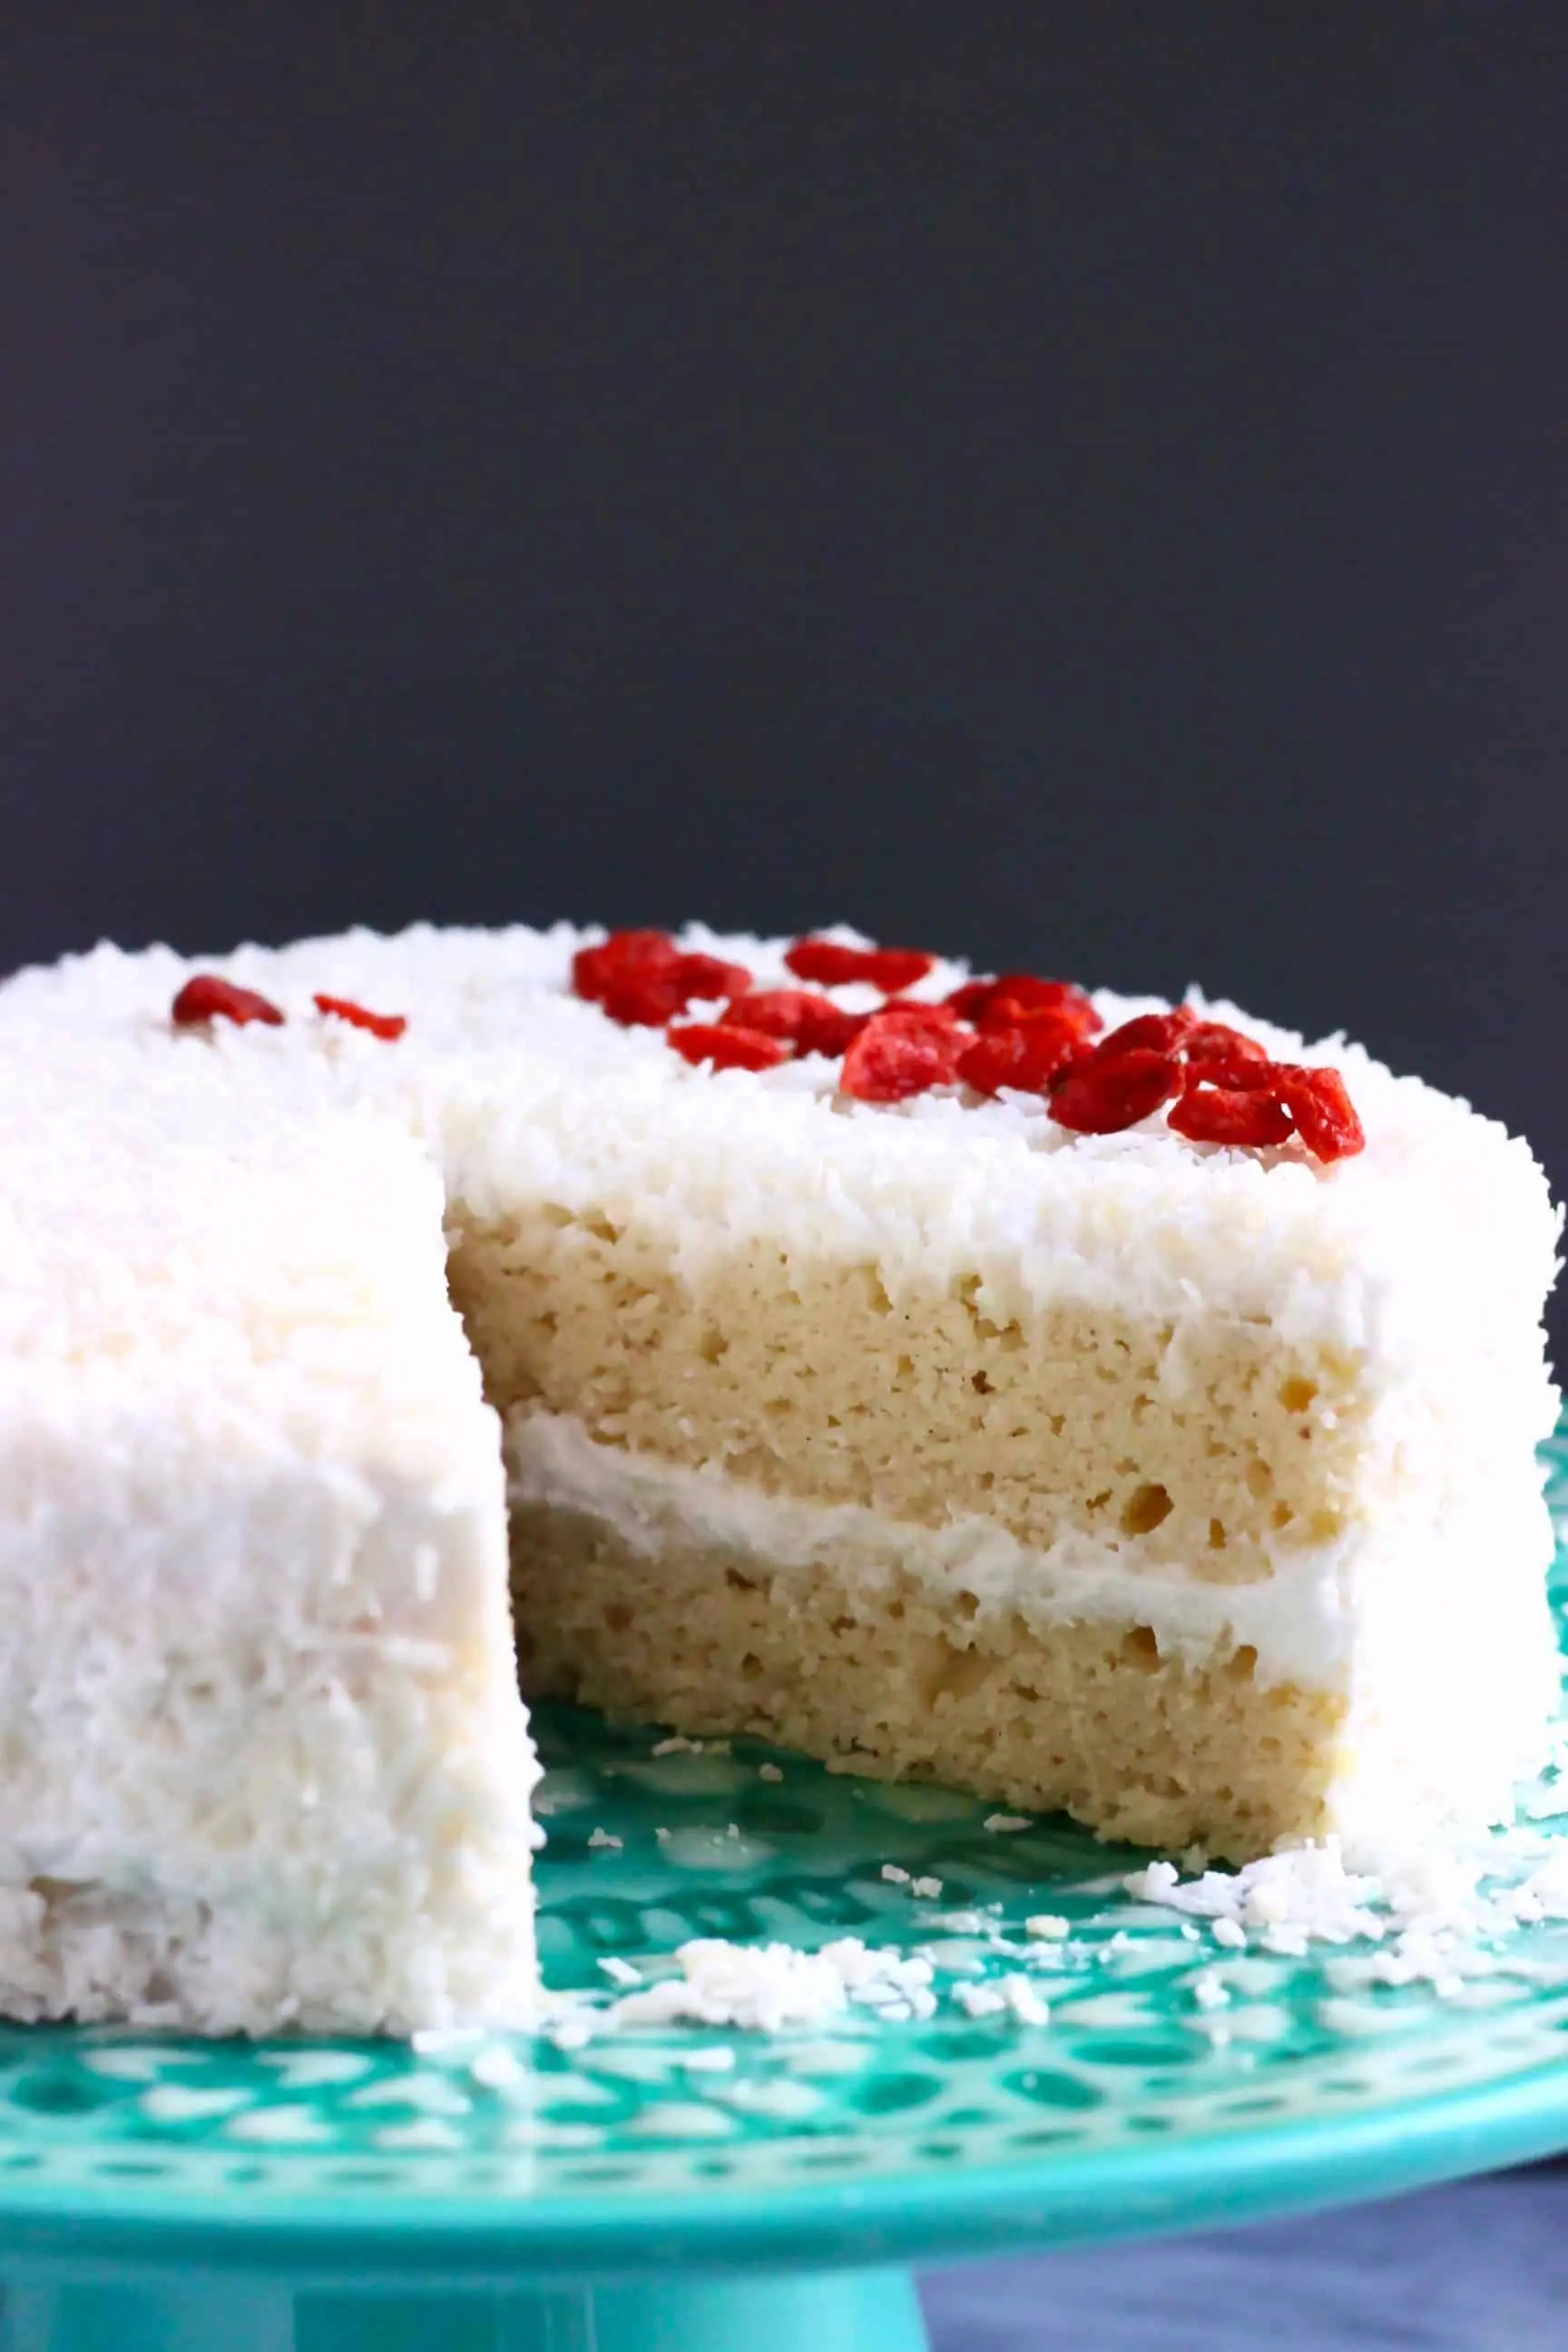 A white coconut cake covered in creamy frosting and coconut sprinkled with red goji berries against a dark grey background